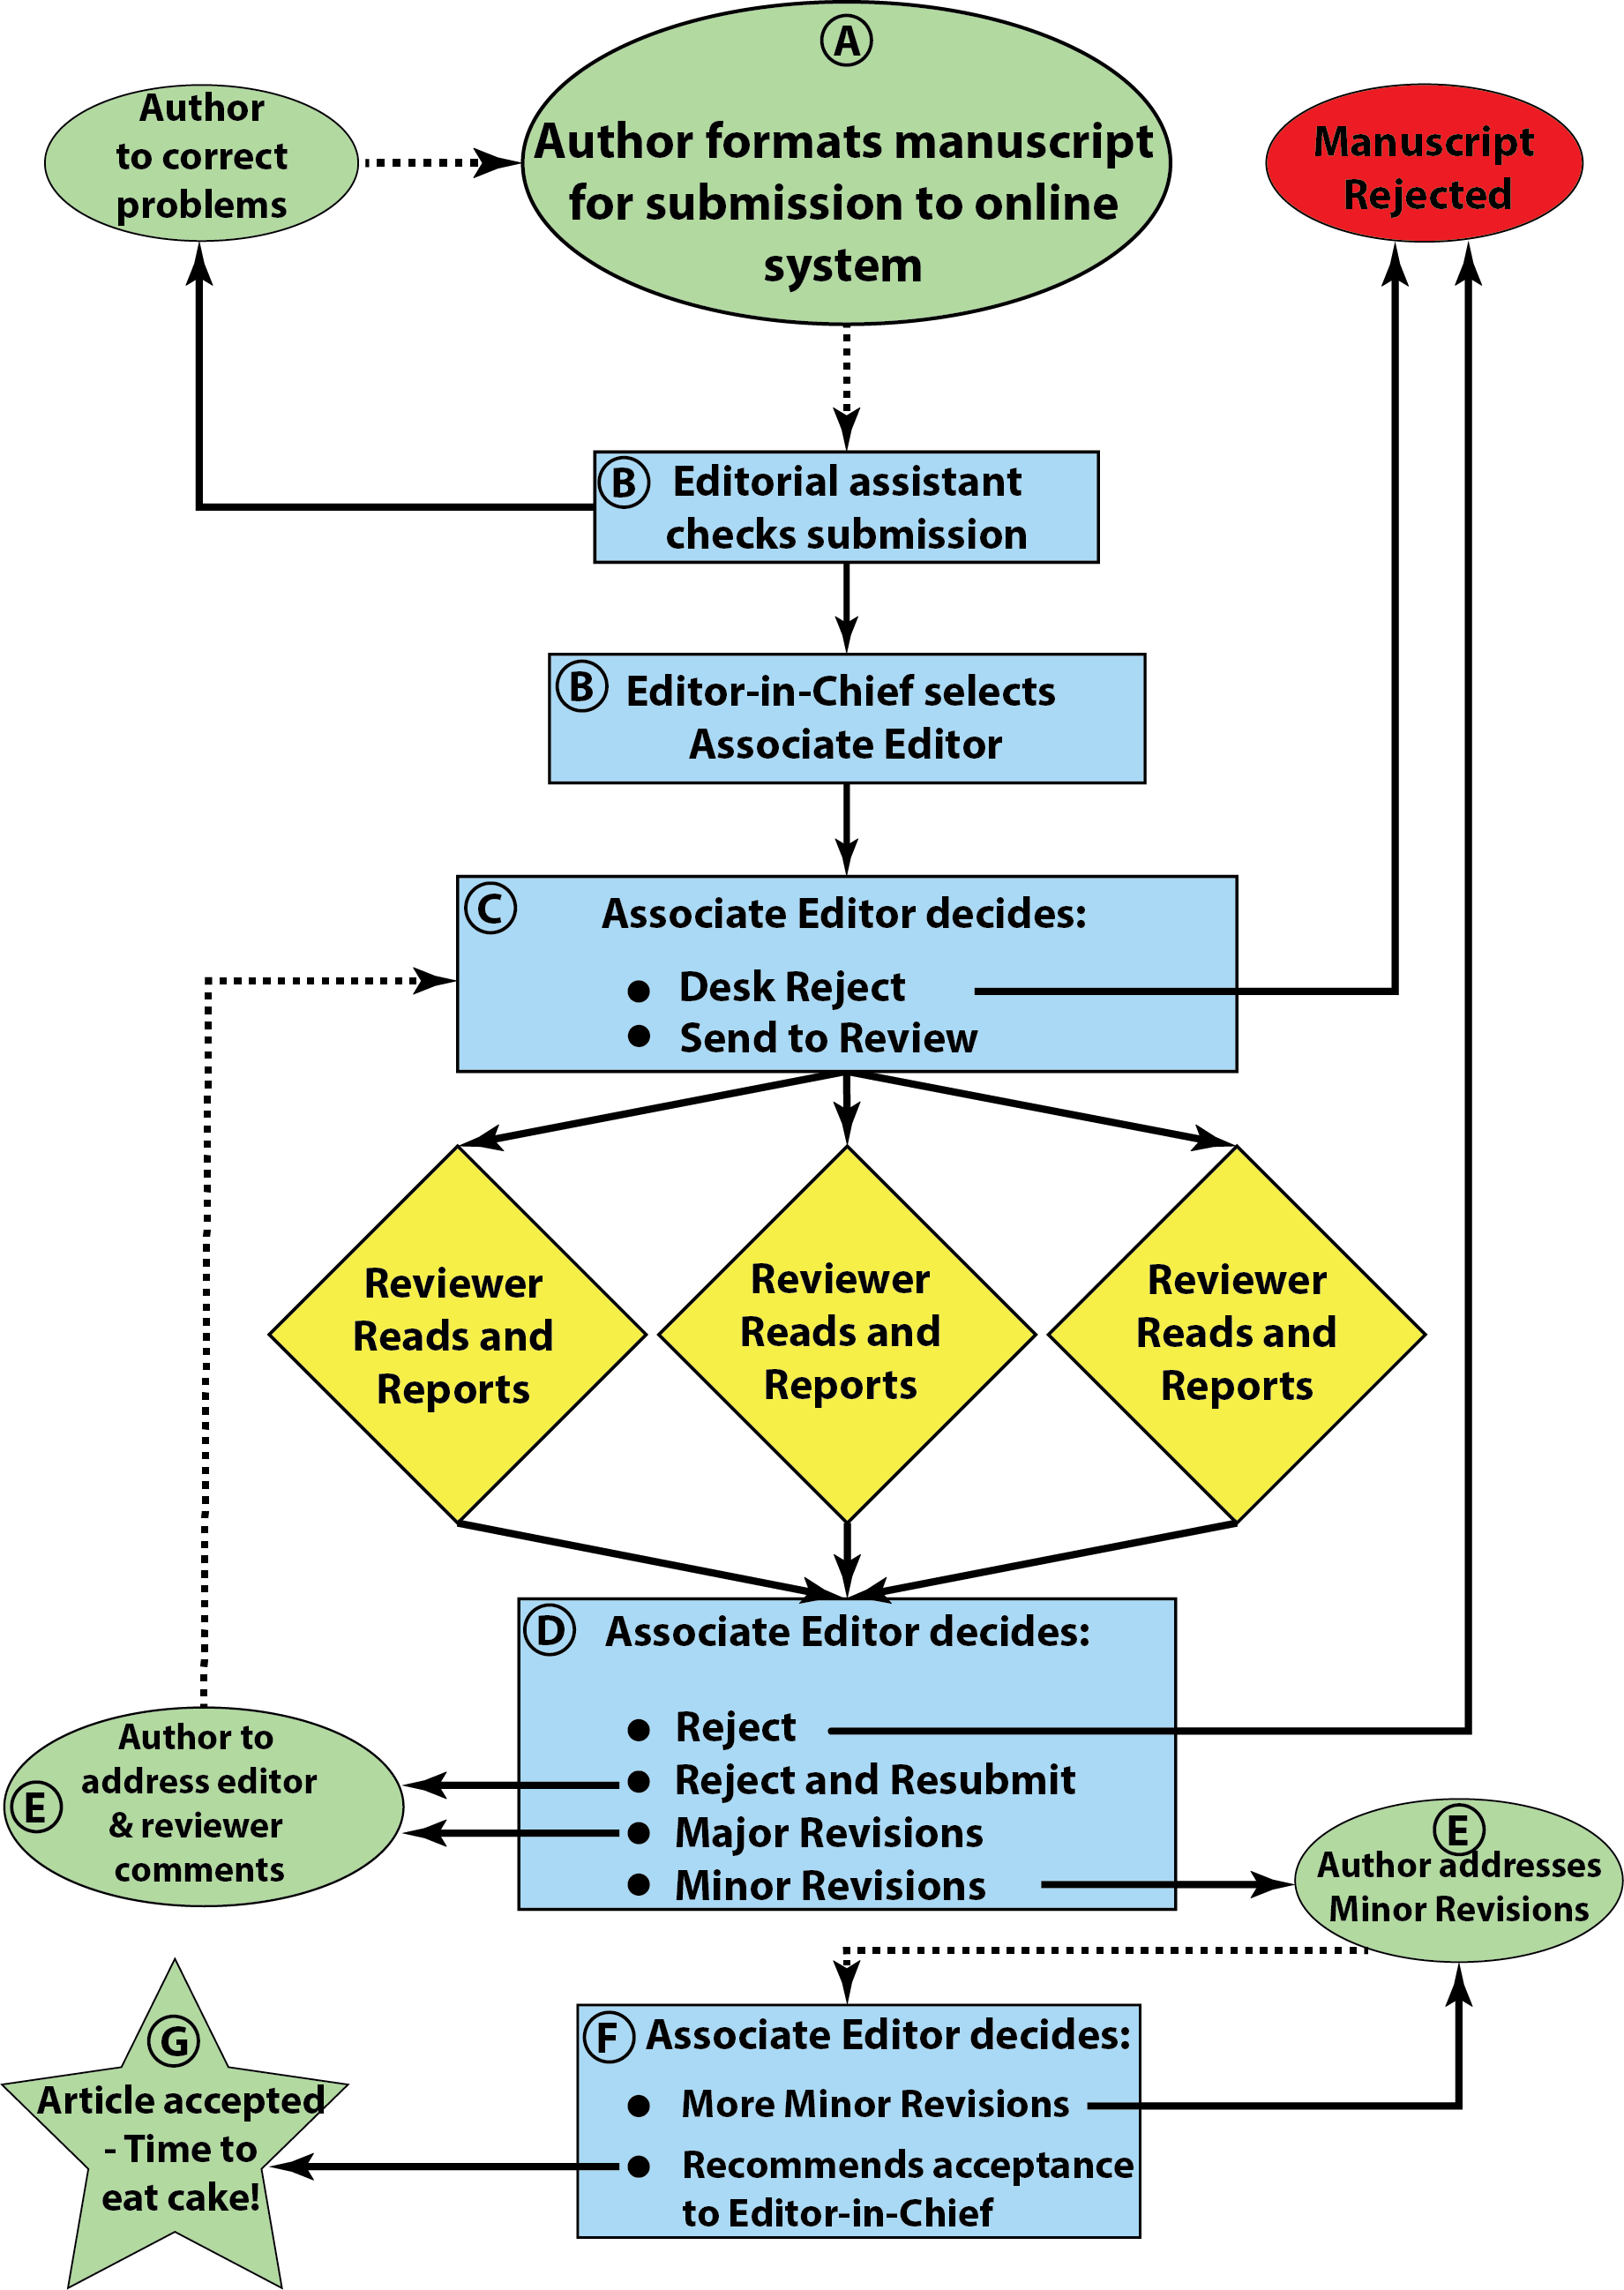 This schematic demonstrates the editorial work-flow of a ‘typical’ journal. Ovals show actions by authors which have dotted lines, while rectangles show work done by the editorial team of the journal with solid lines. Referees are shown as diamonds. Letters in circles refer to the sections of the text (below). All arrows are potential places for delays.